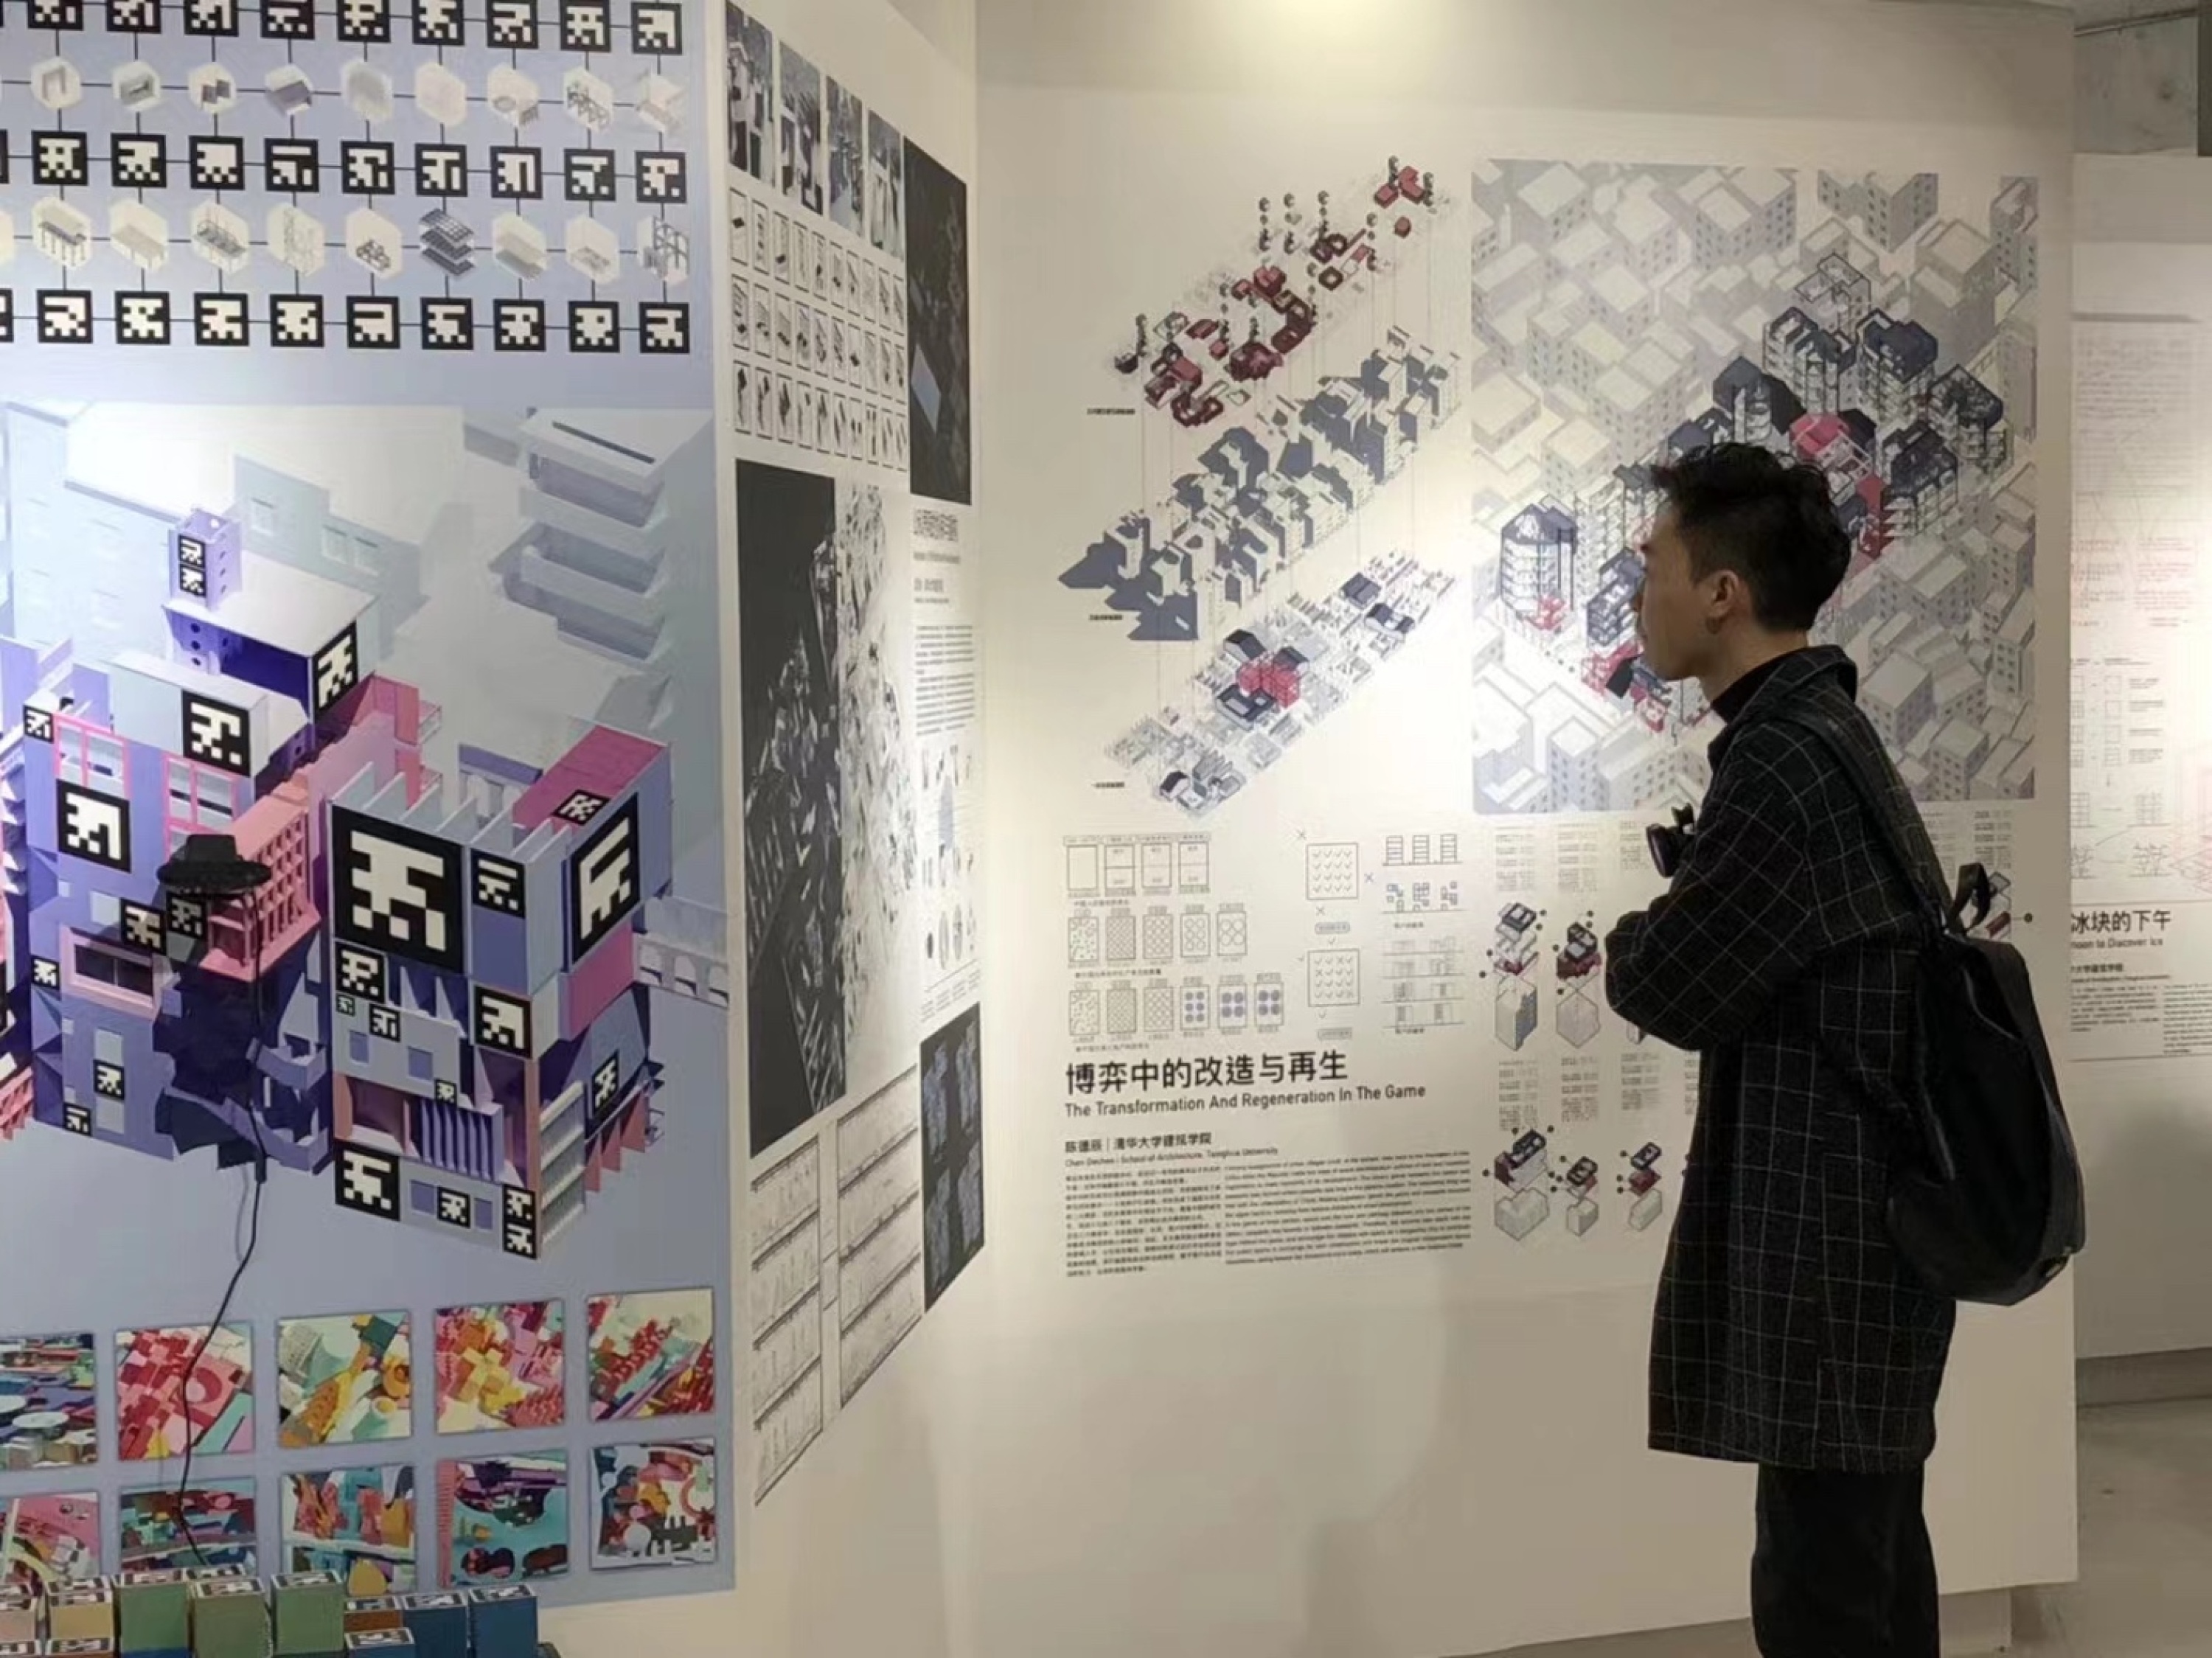 The “Influence and Resistance - Tsinghua University and Central Academy of Fine Arts Co-Exhibition" Opened at the Main Exhibition Hall of the 2017 Bi-City Biennale of Urbanism/Architecture (Shenzhen)